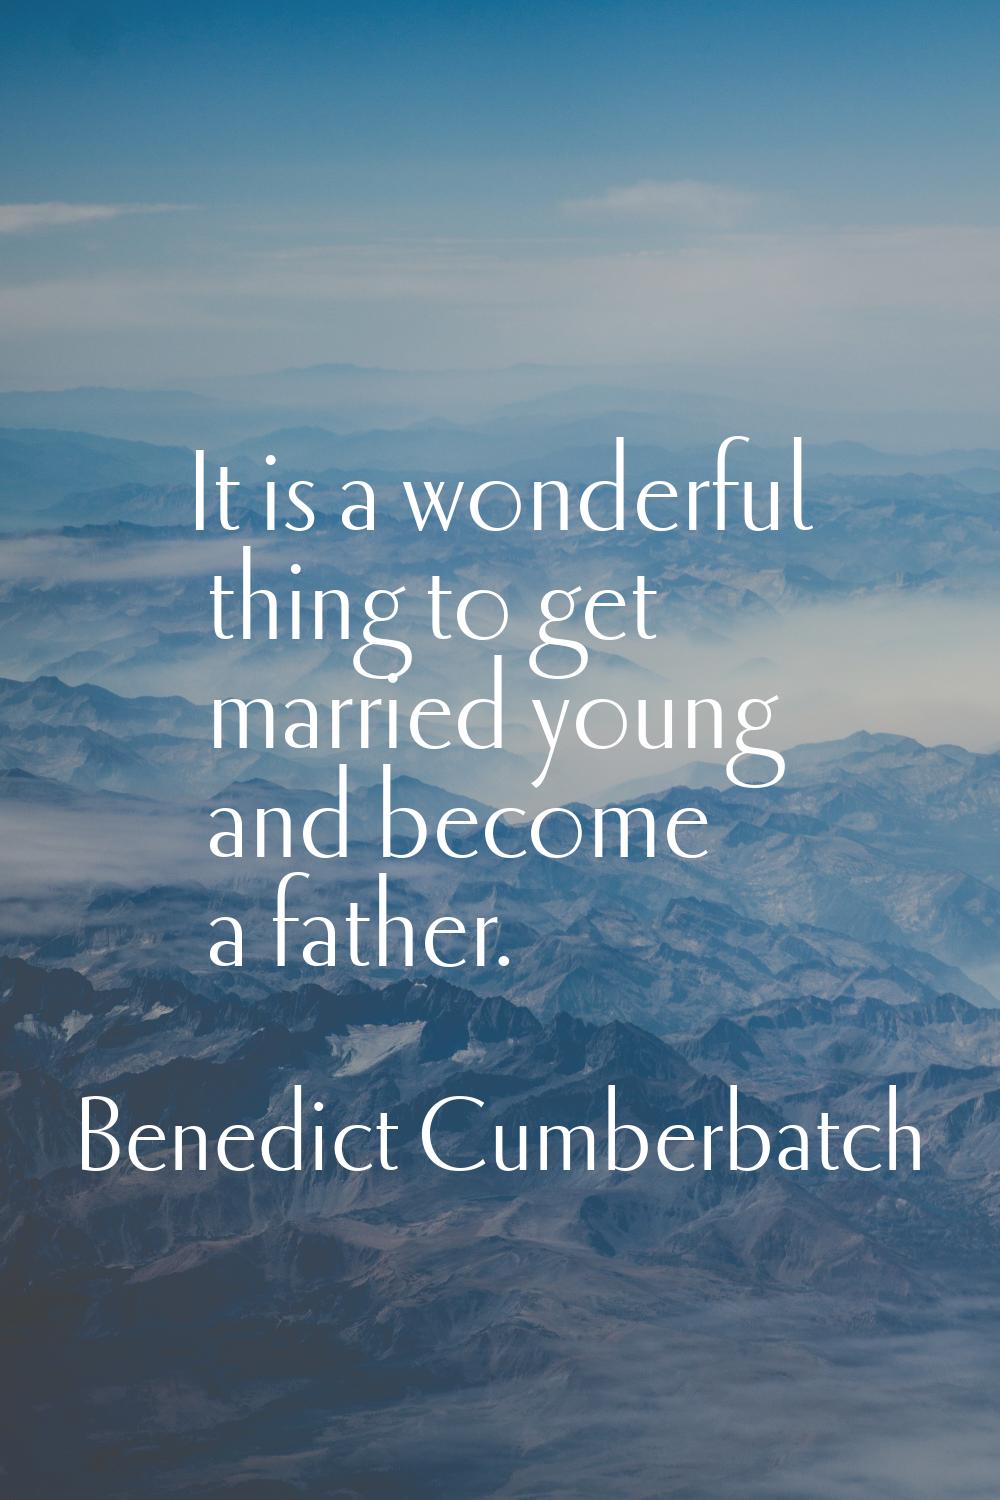 It is a wonderful thing to get married young and become a father.